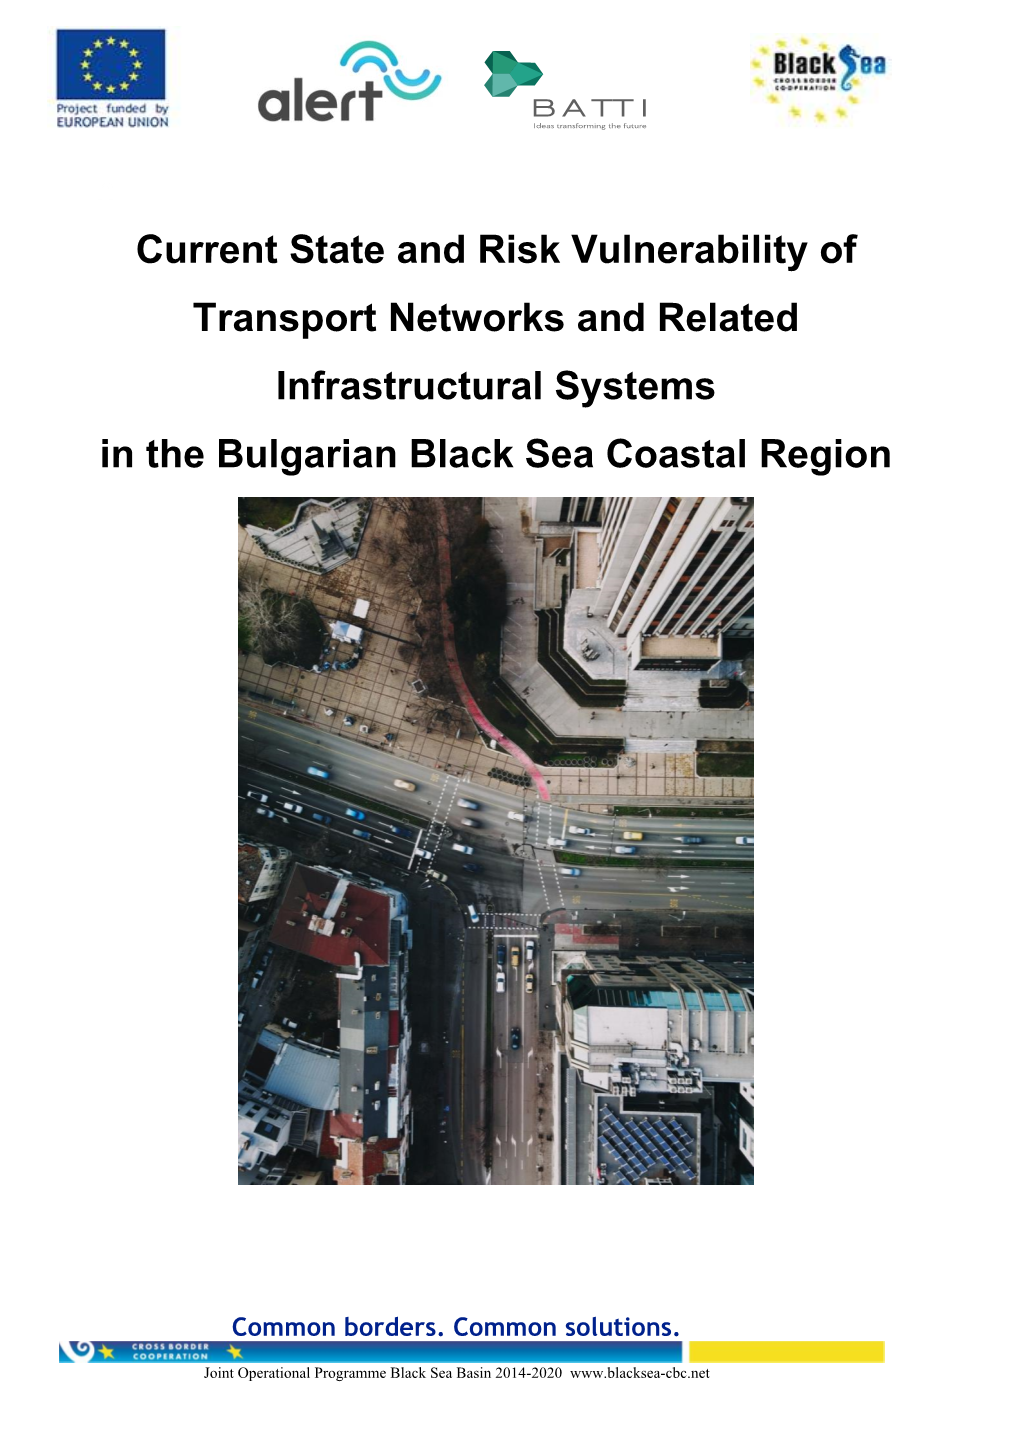 Current State and Risk Vulnerability of Transport Networks and Related Infrastructural Systems in the Bulgarian Black Sea Coastal Region